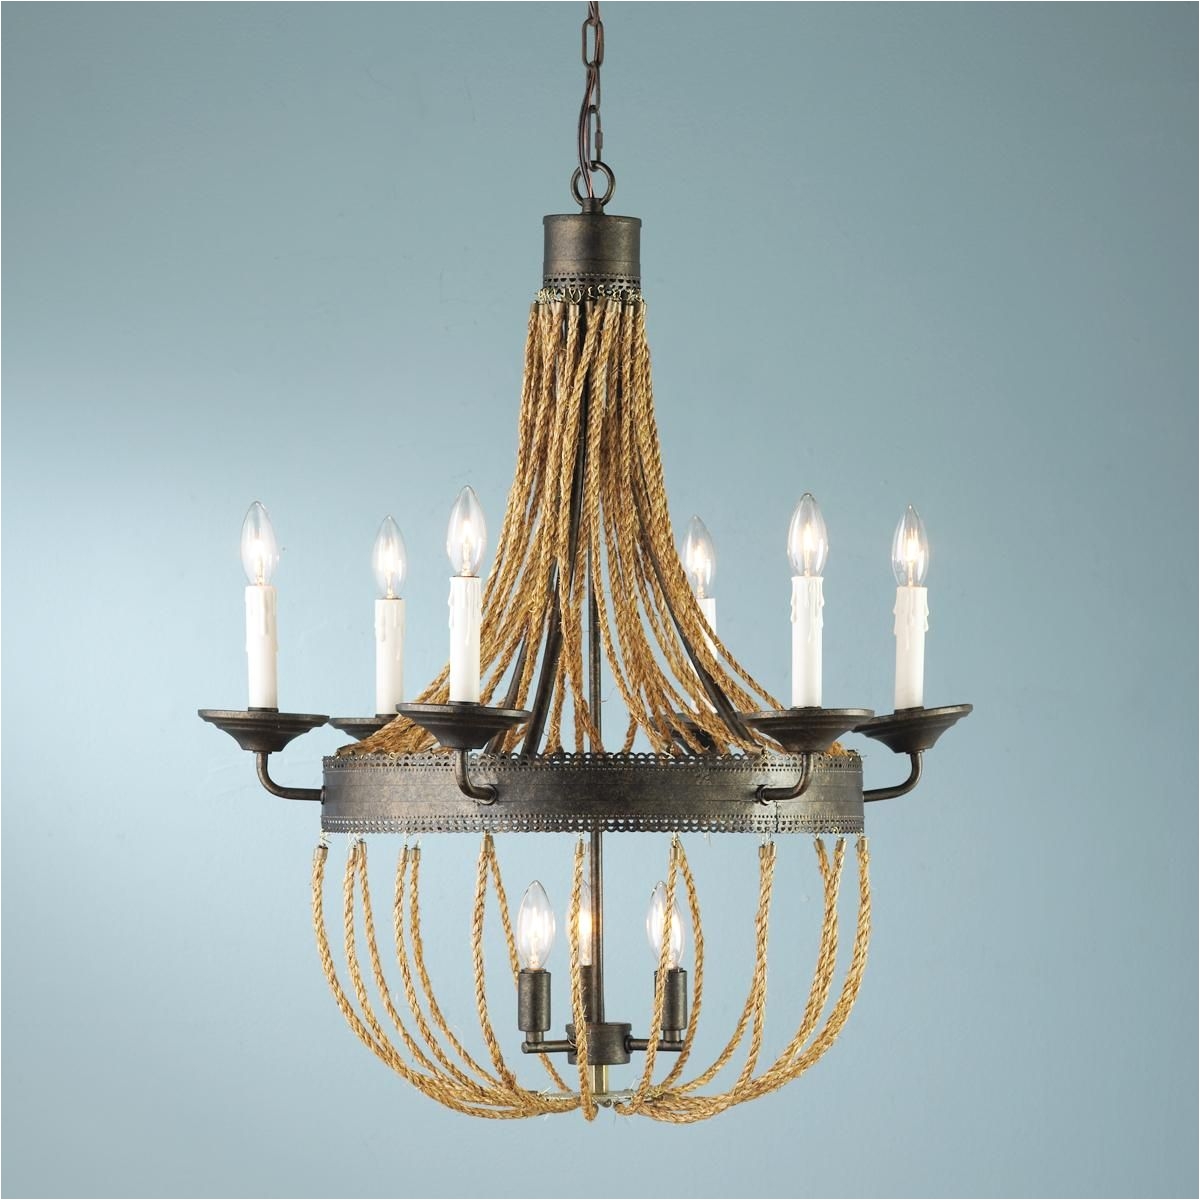 Jute Rope Chandelier A bination of aged Rusty Bronze with natural Jute rope creates the perfect look from rustic lodge to coastal living